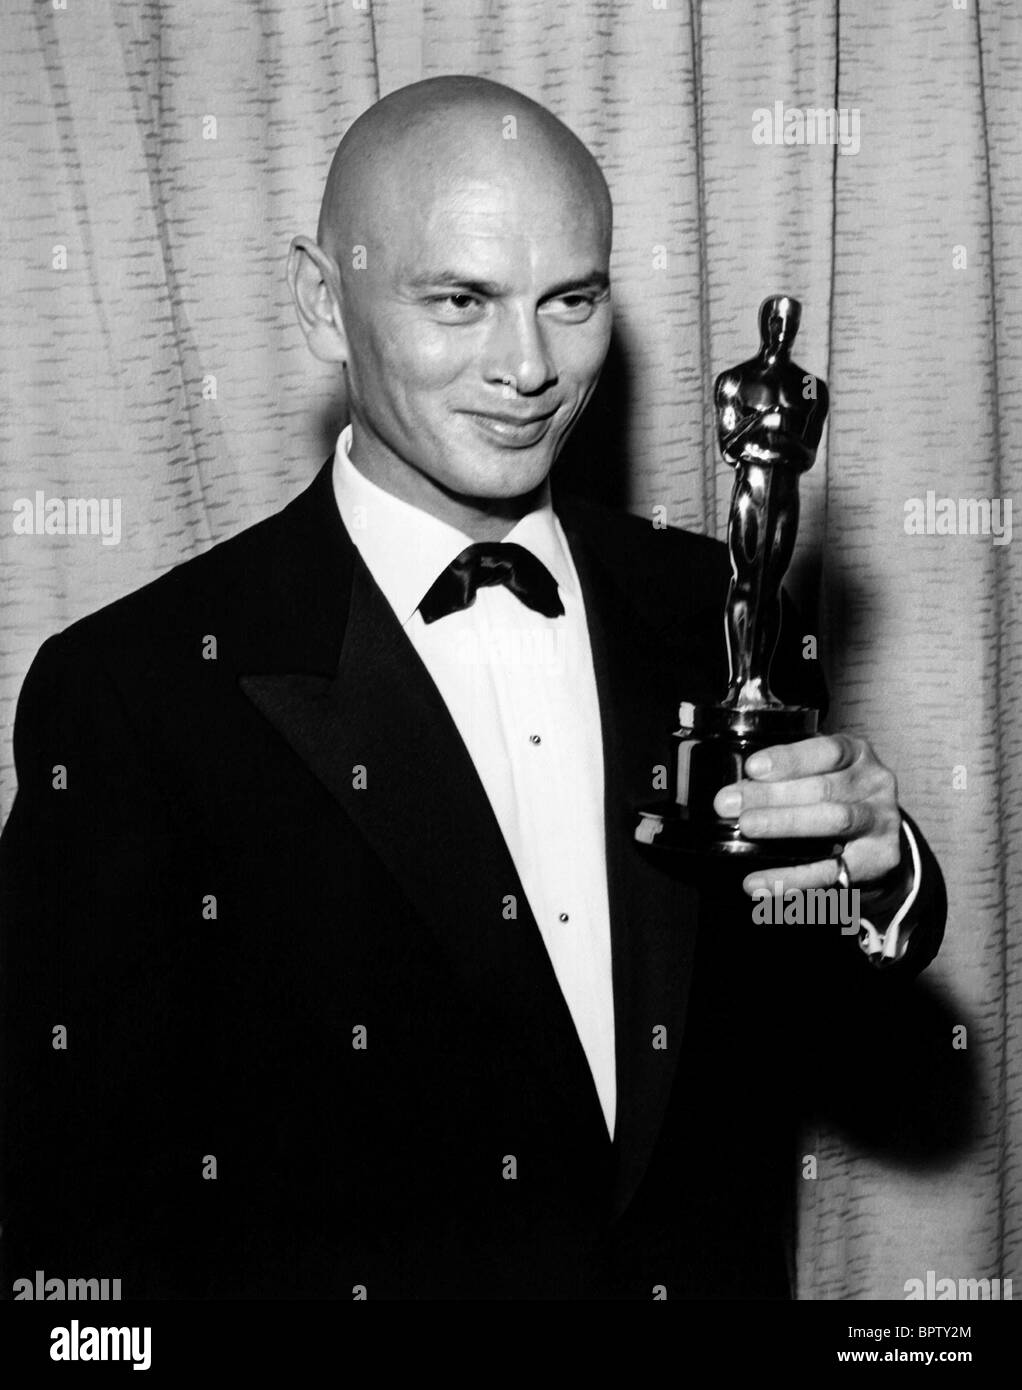 YUL BRYNNER WITH OSCAR ACTOR THE KING AND I (1956) Stock Photo